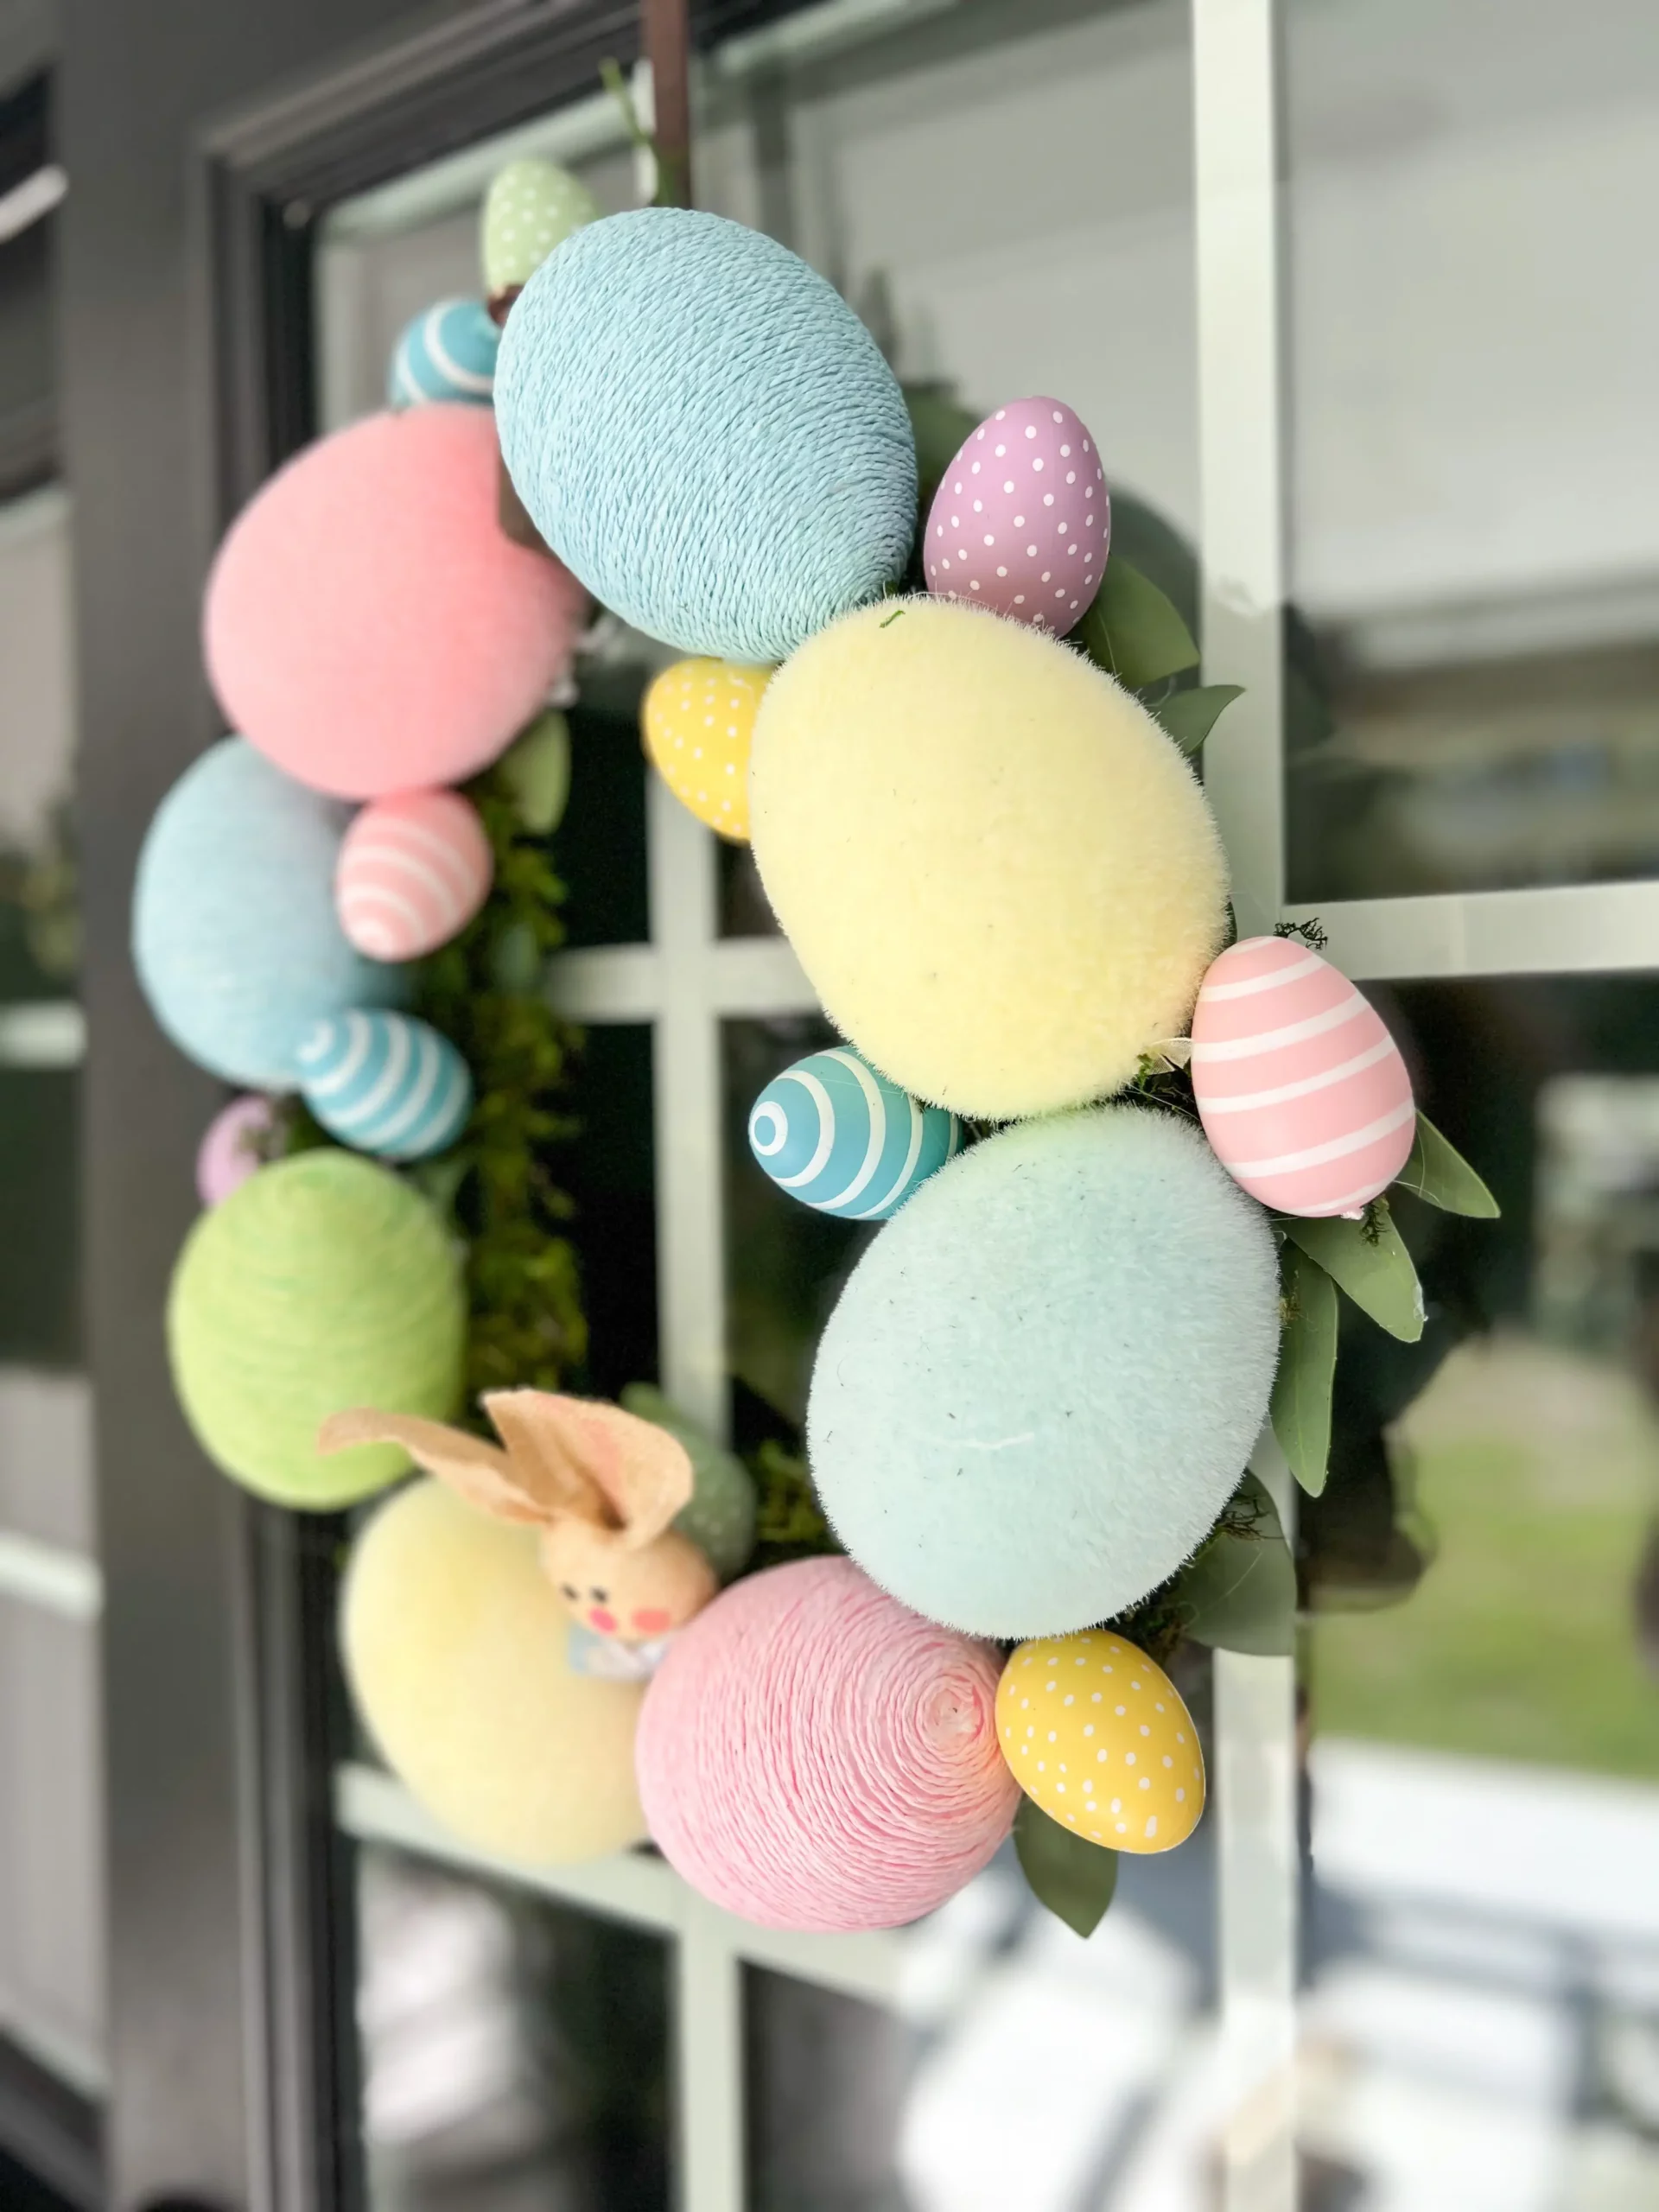 finished egg wreath on front door